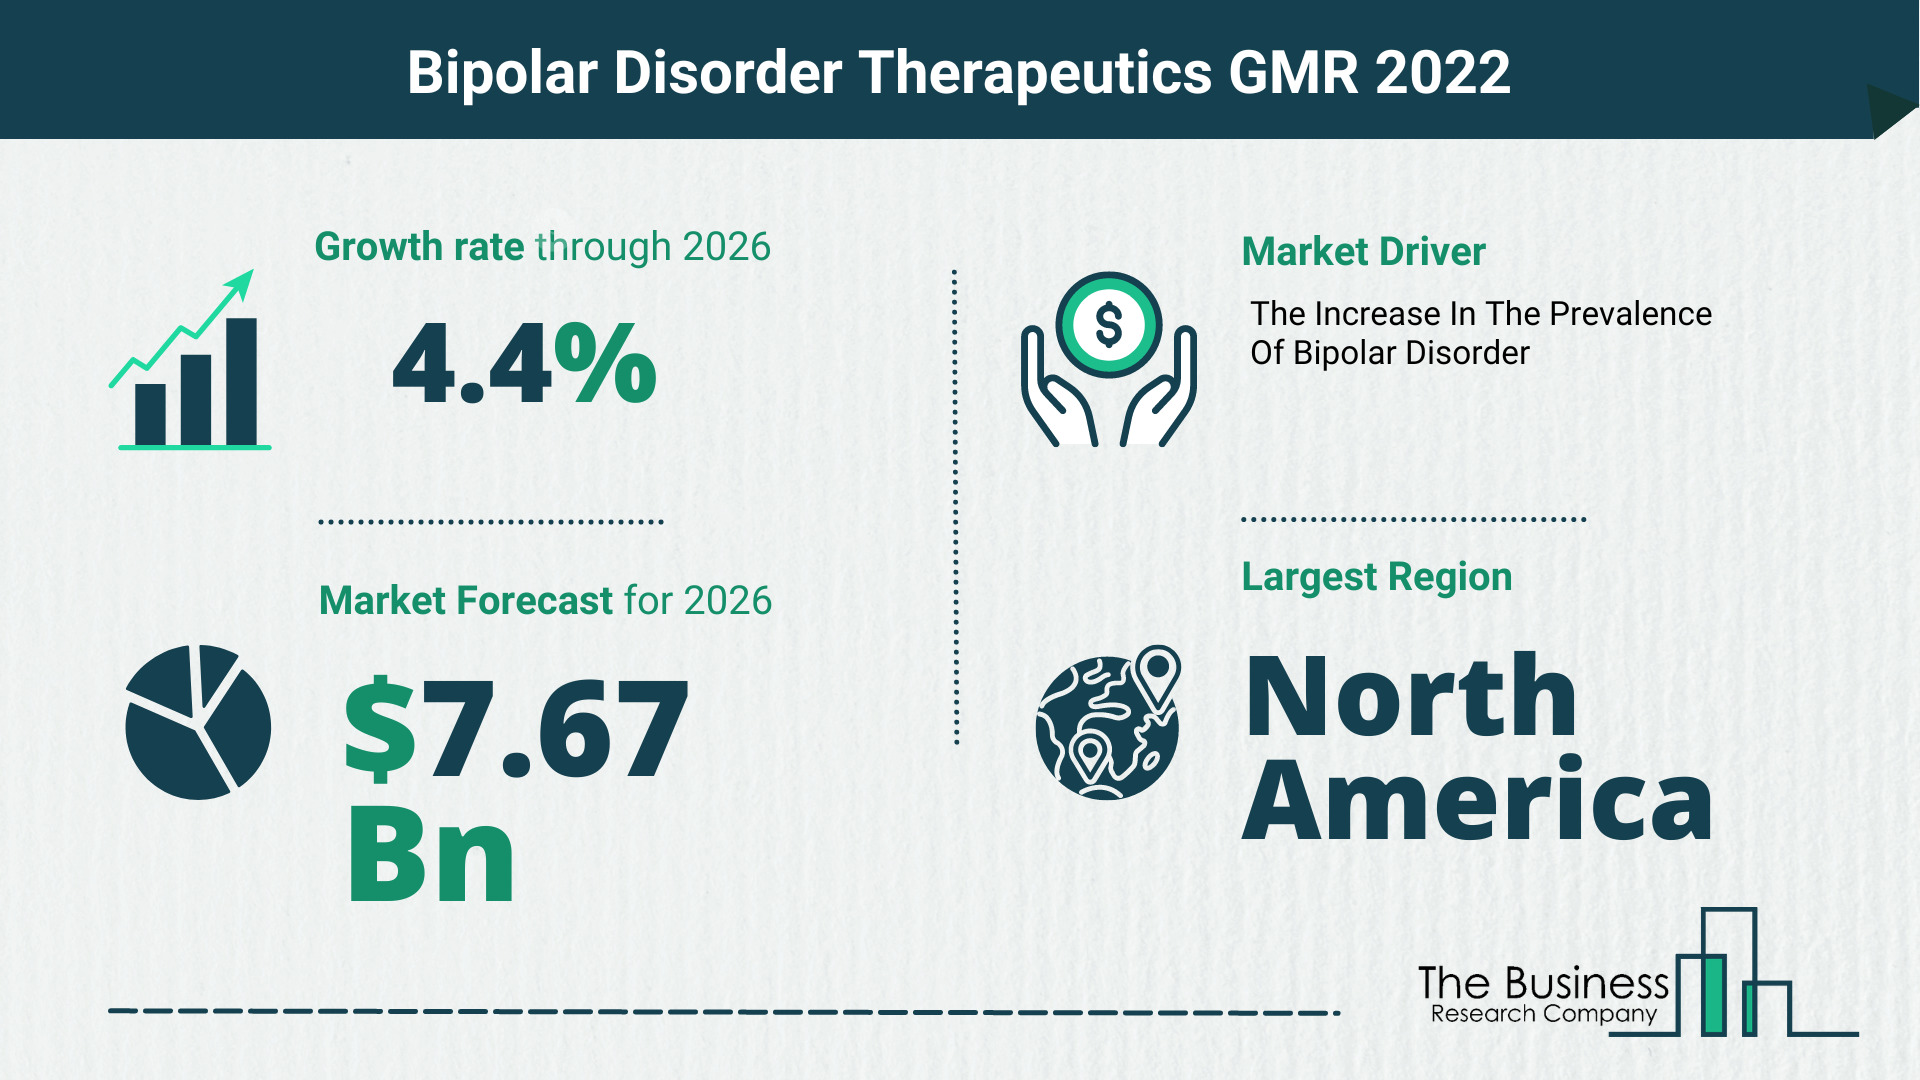 Latest Bipolar Disorder Therapeutics Market Growth Study 2022-2026 By The Business Research Company